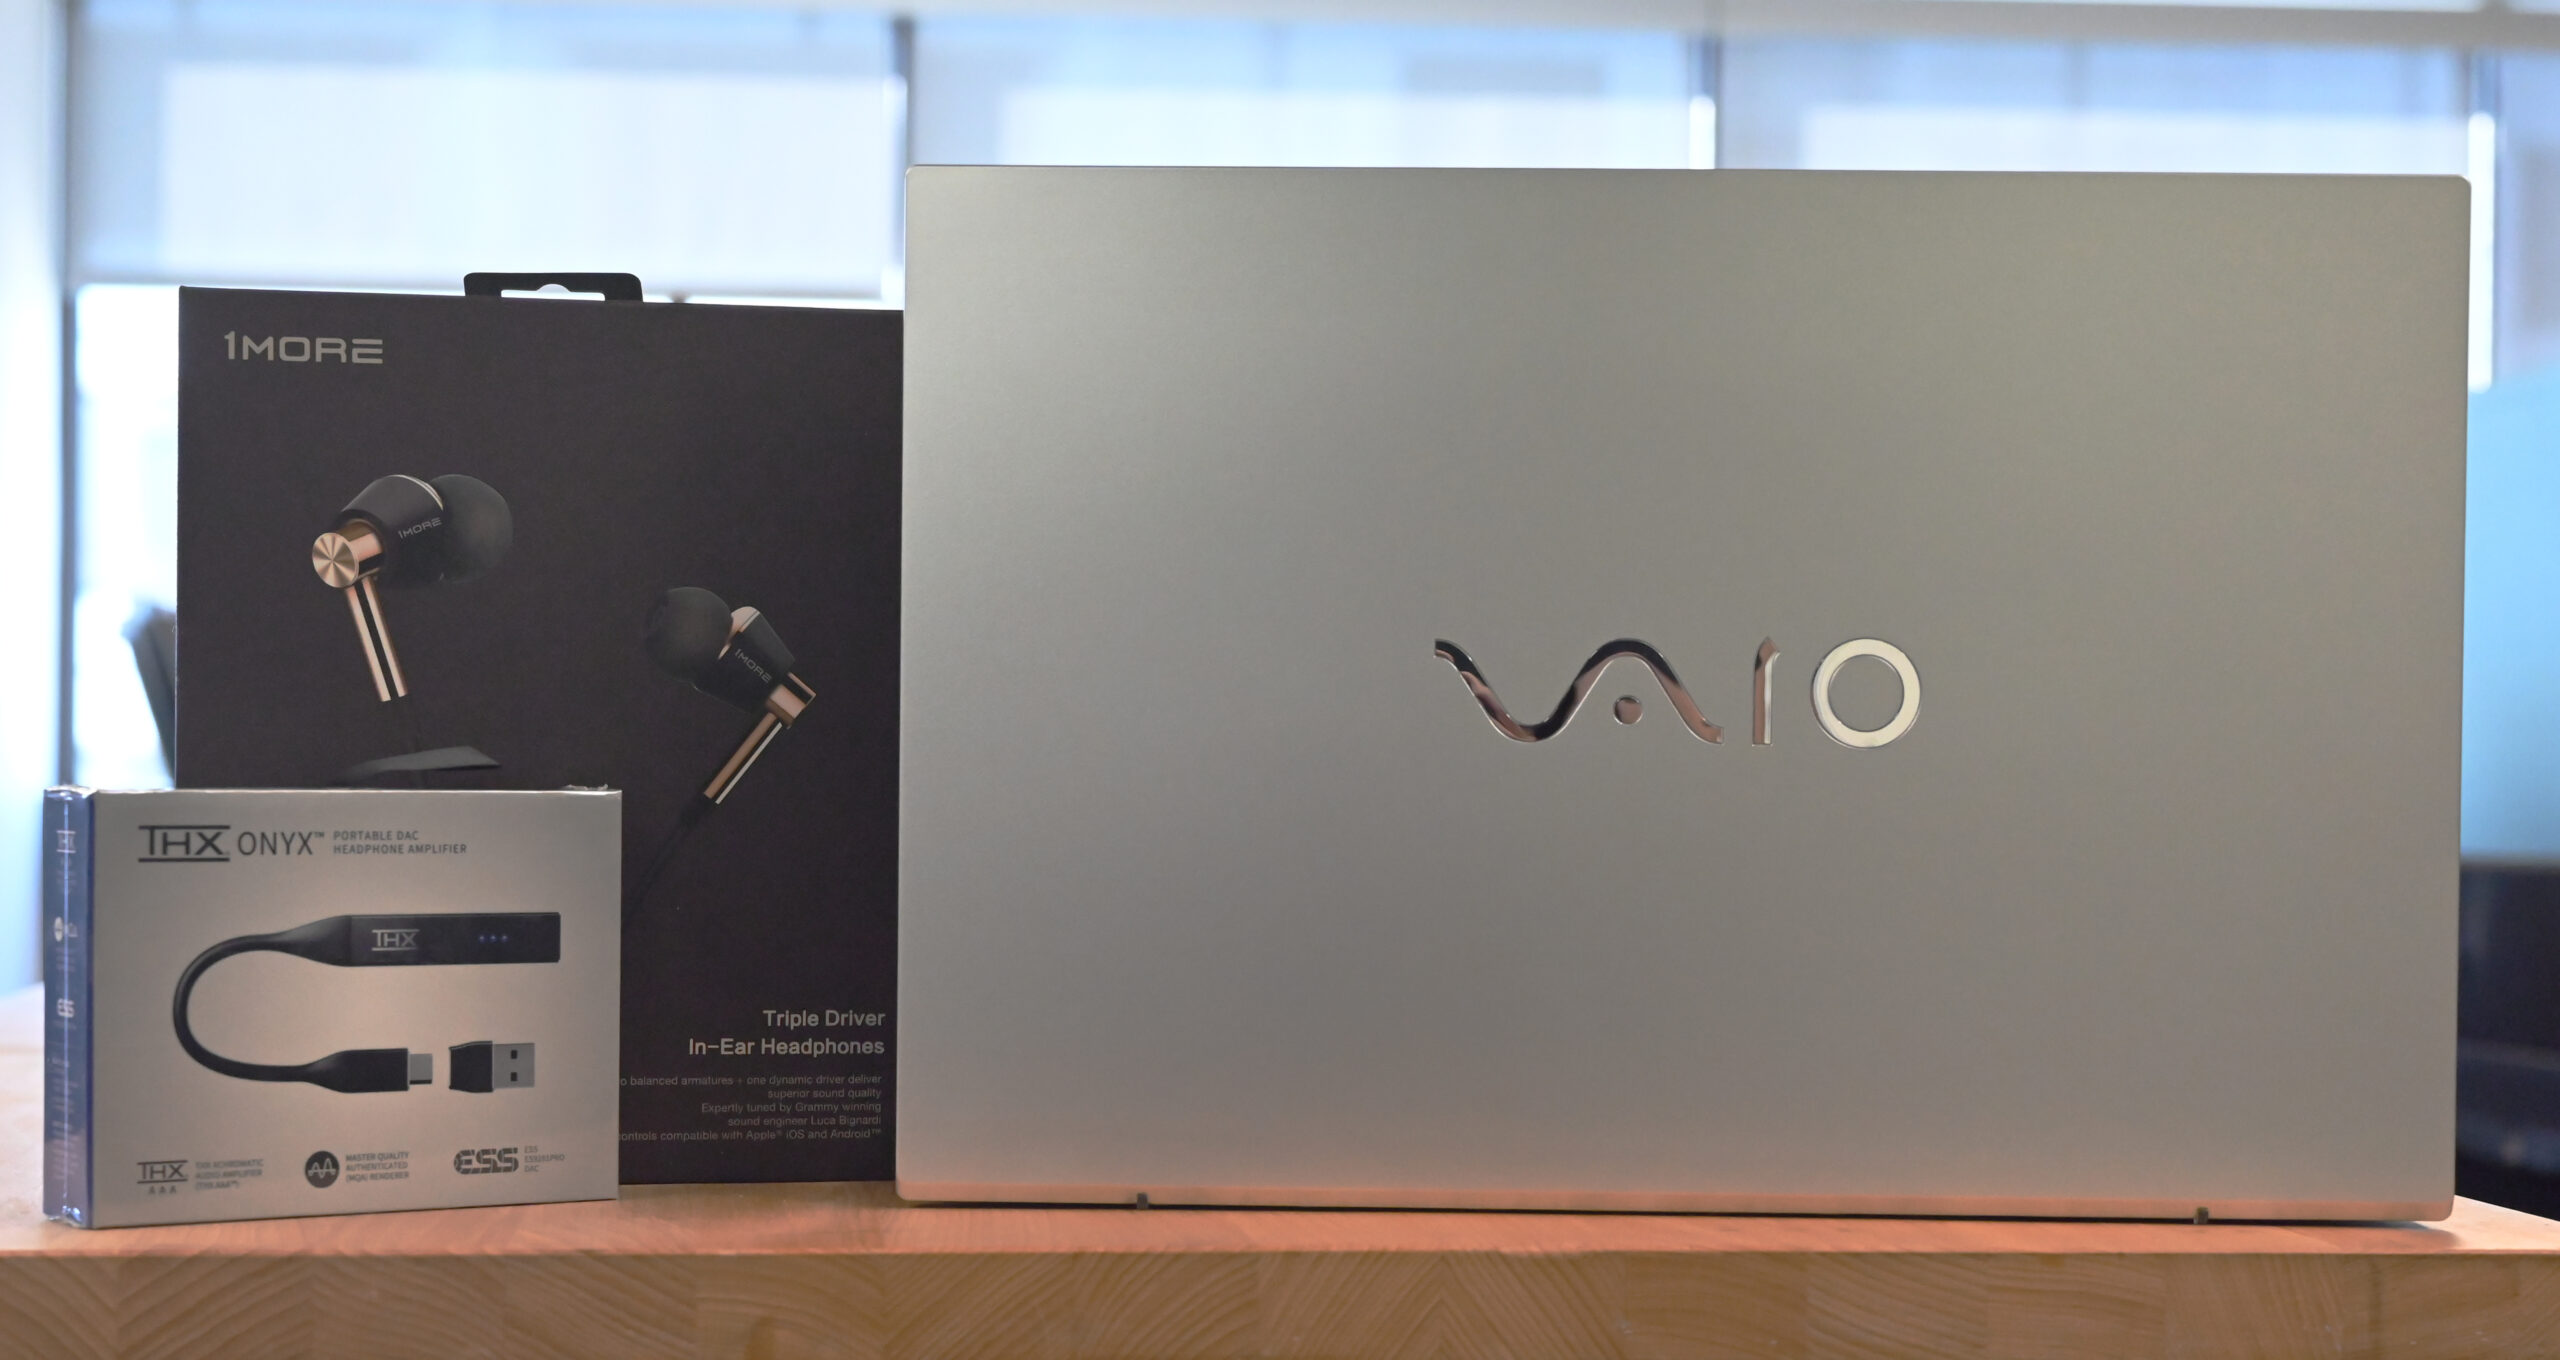 1MORE headphones, THX onyx and VAIO laptop sitting on a table